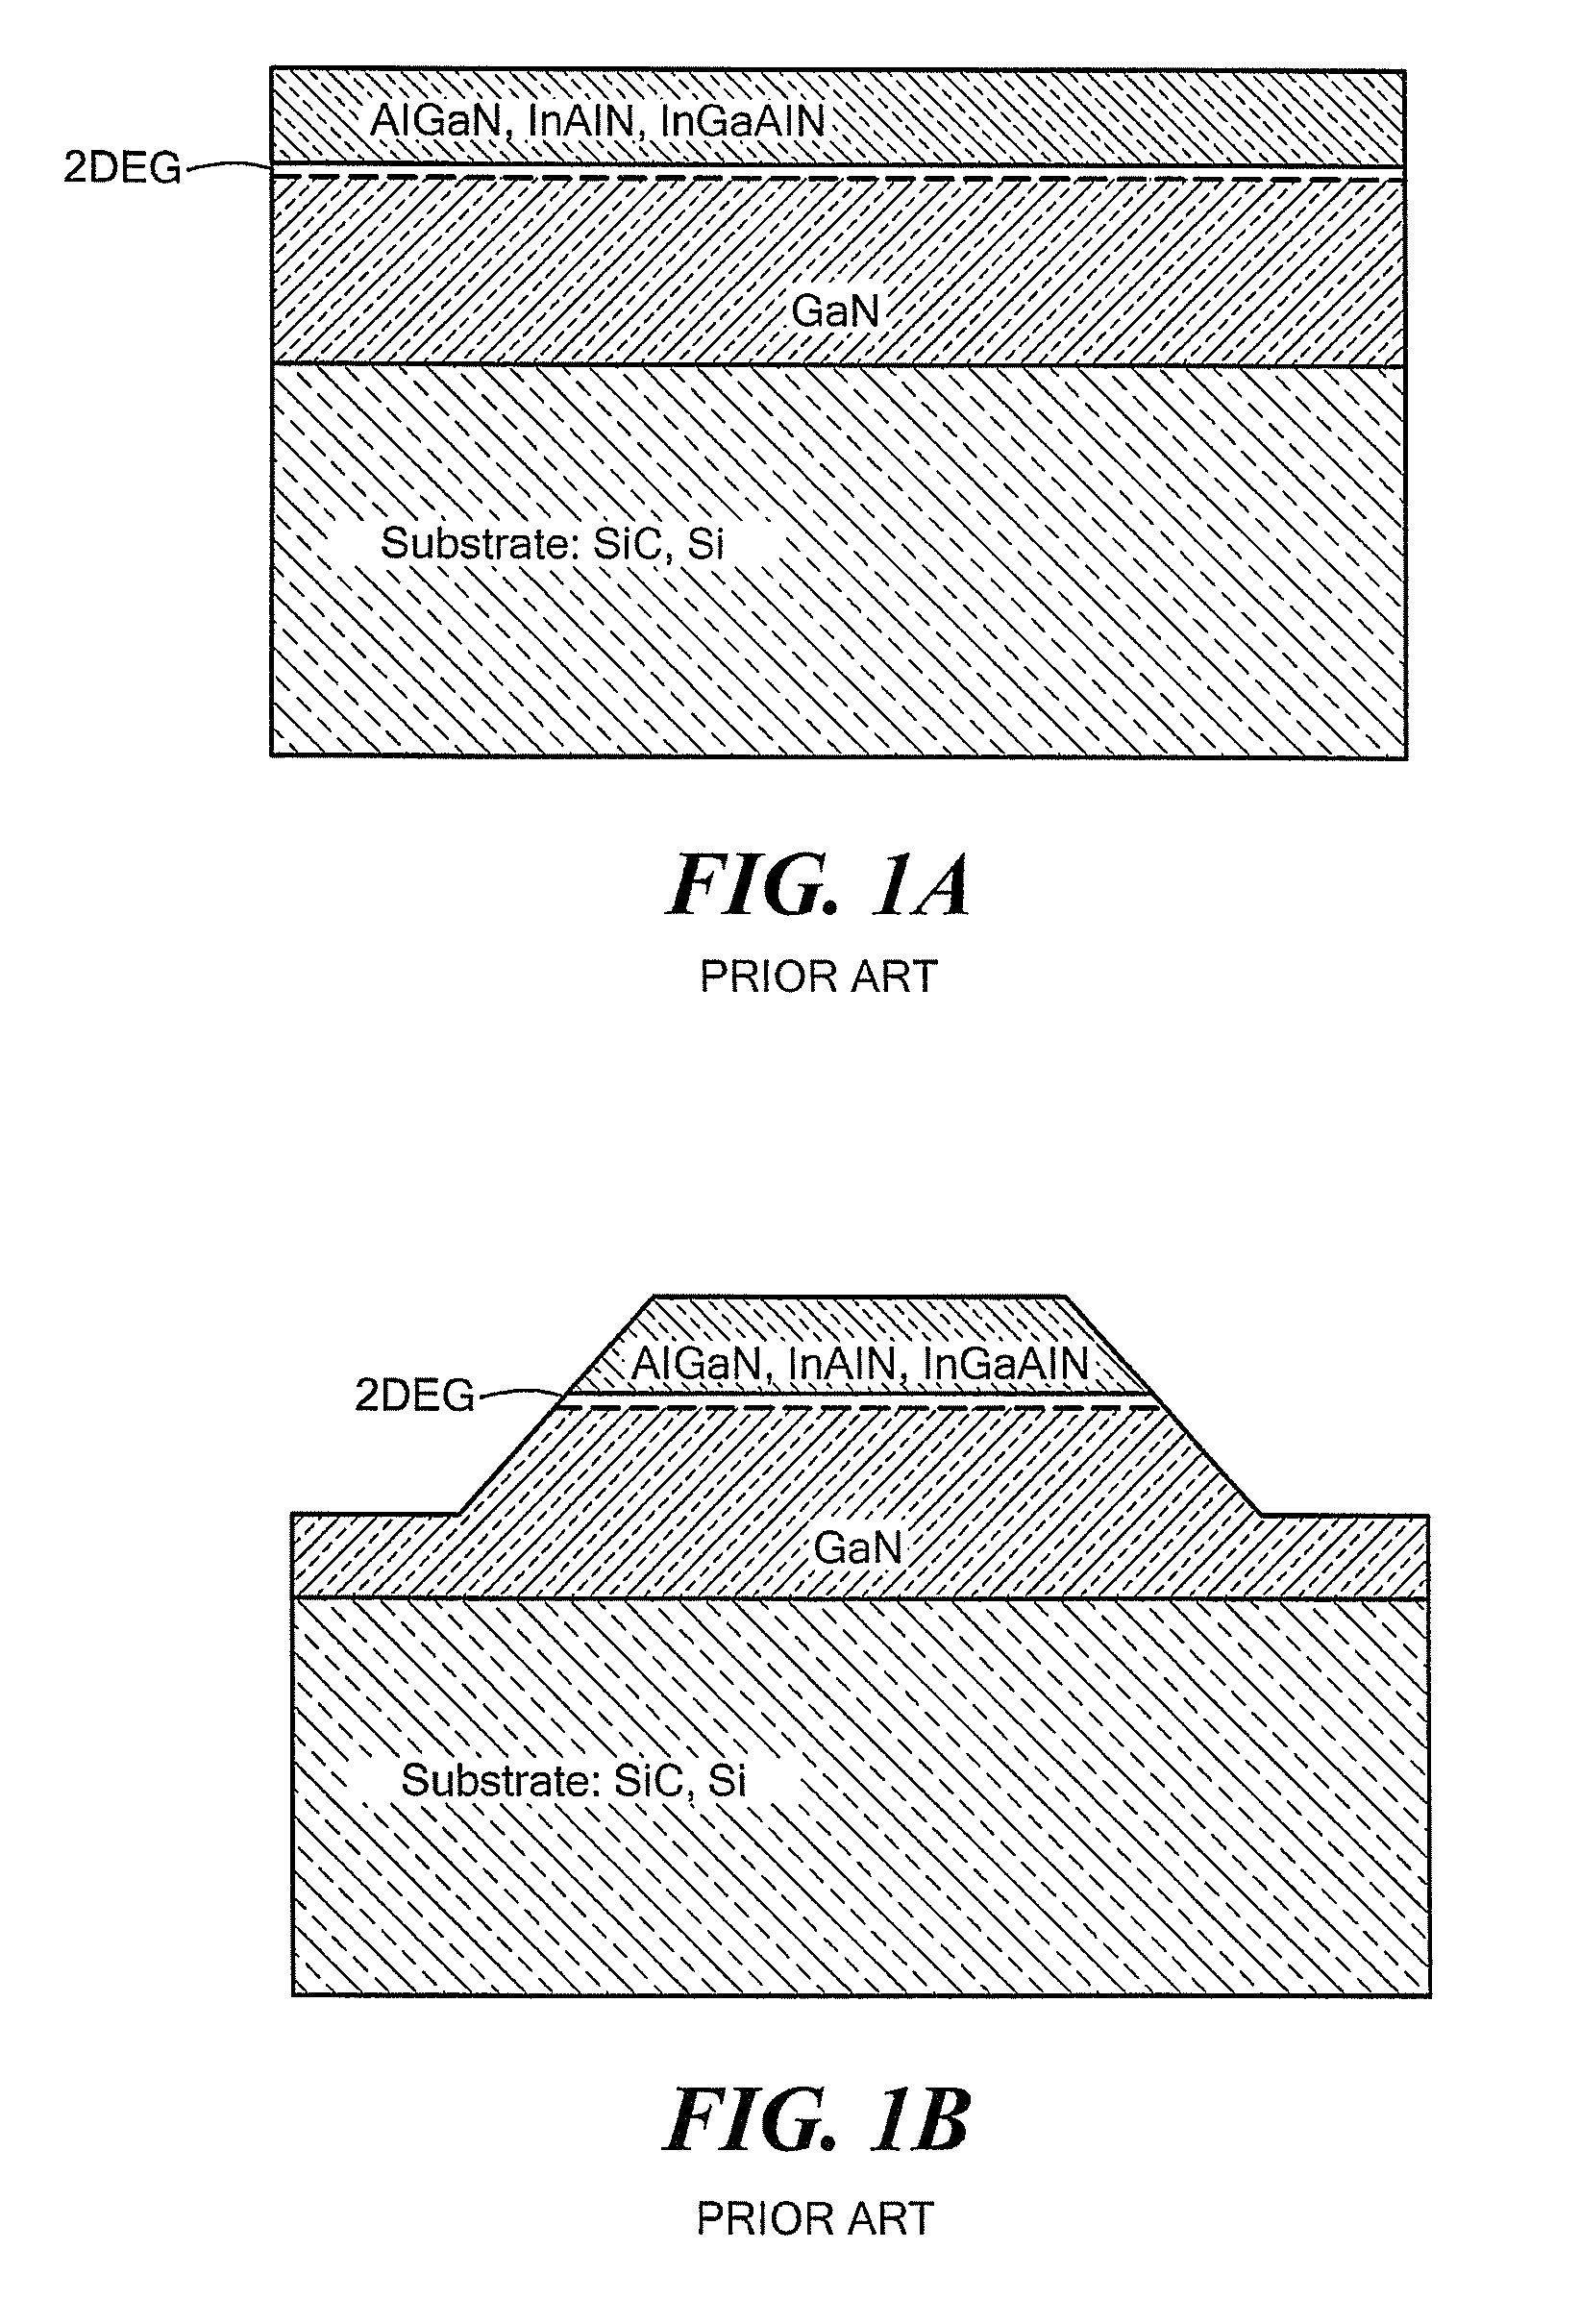 Gallium nitride devices having low ohmic contact resistance